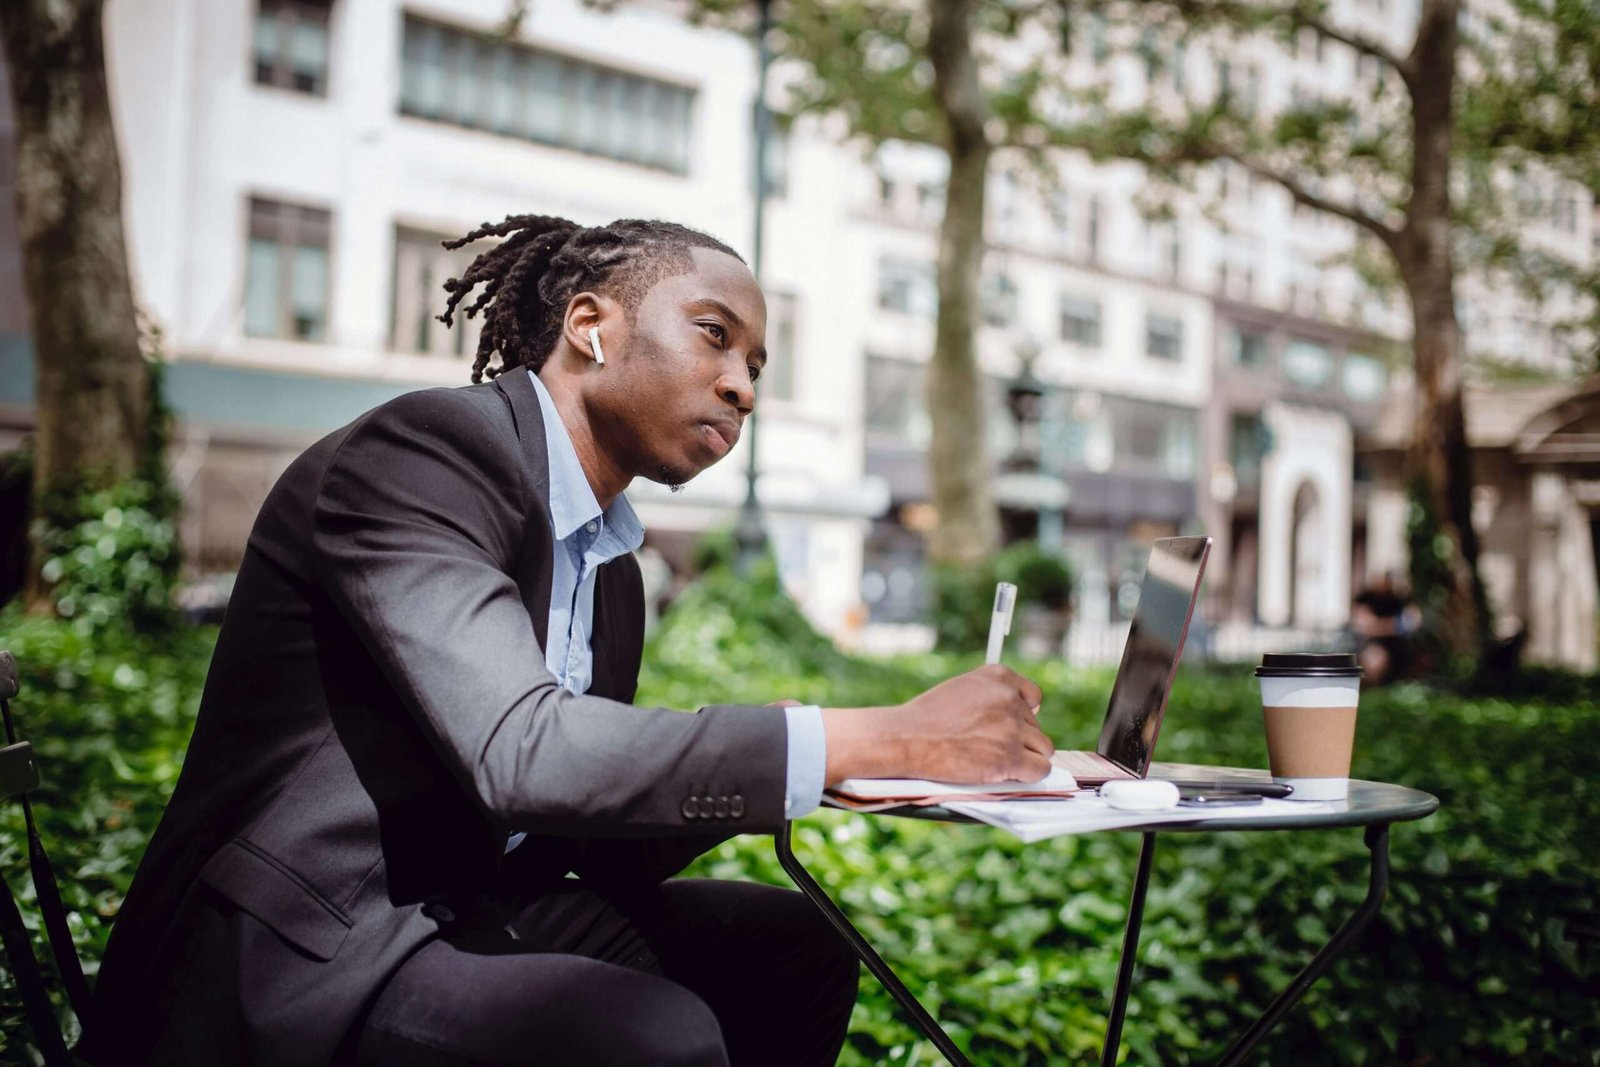 Photo by Ketut Subiyanto: https://www.pexels.com/photo/pensive-african-american-journalist-writing-thoughts-in-notebook-sitting-in-outdoor-cafeteria-4559602/